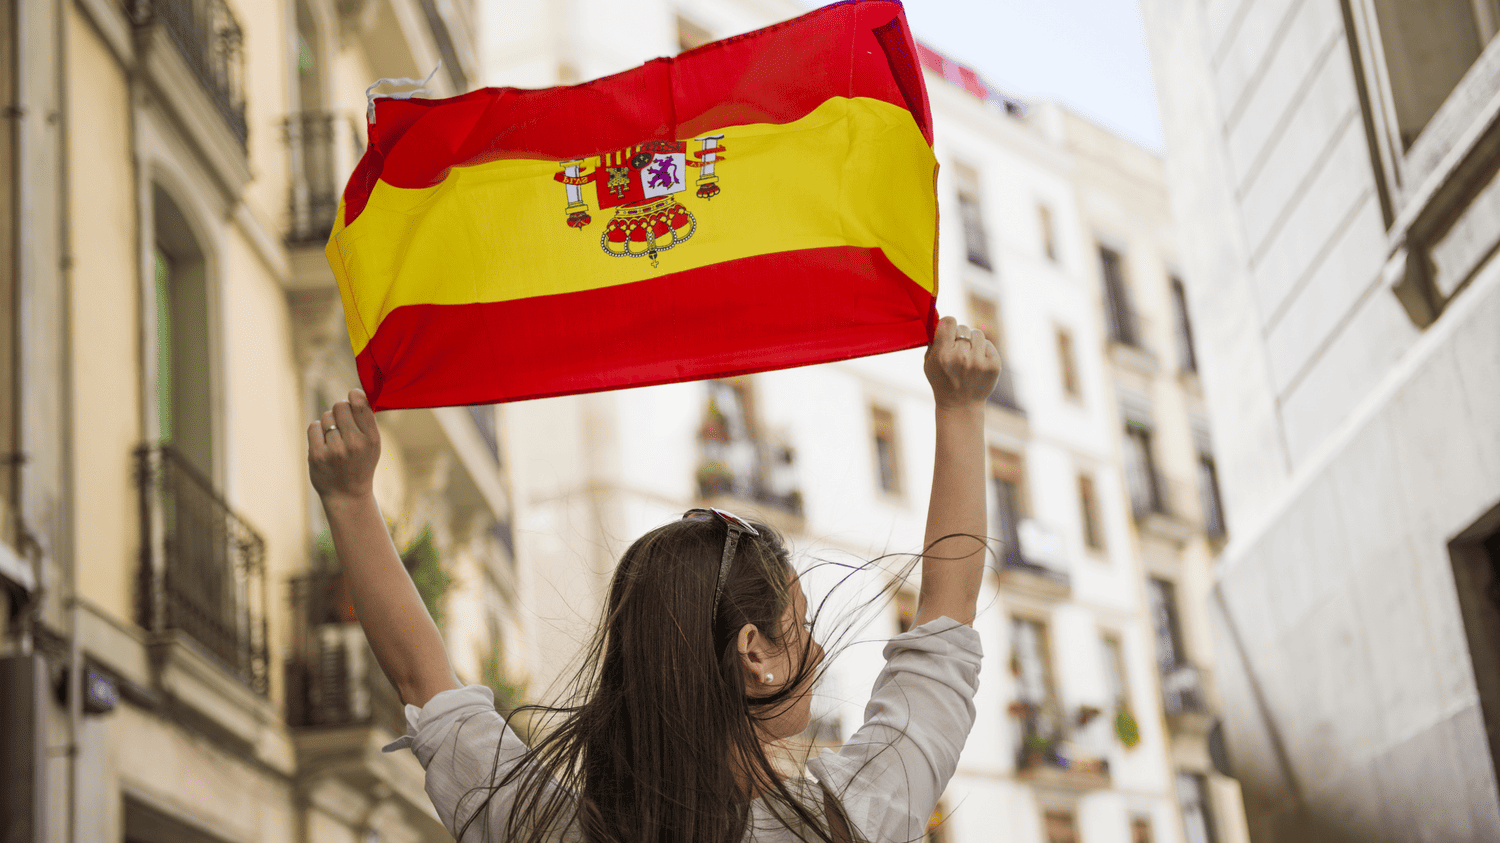 Moving to Spain from US